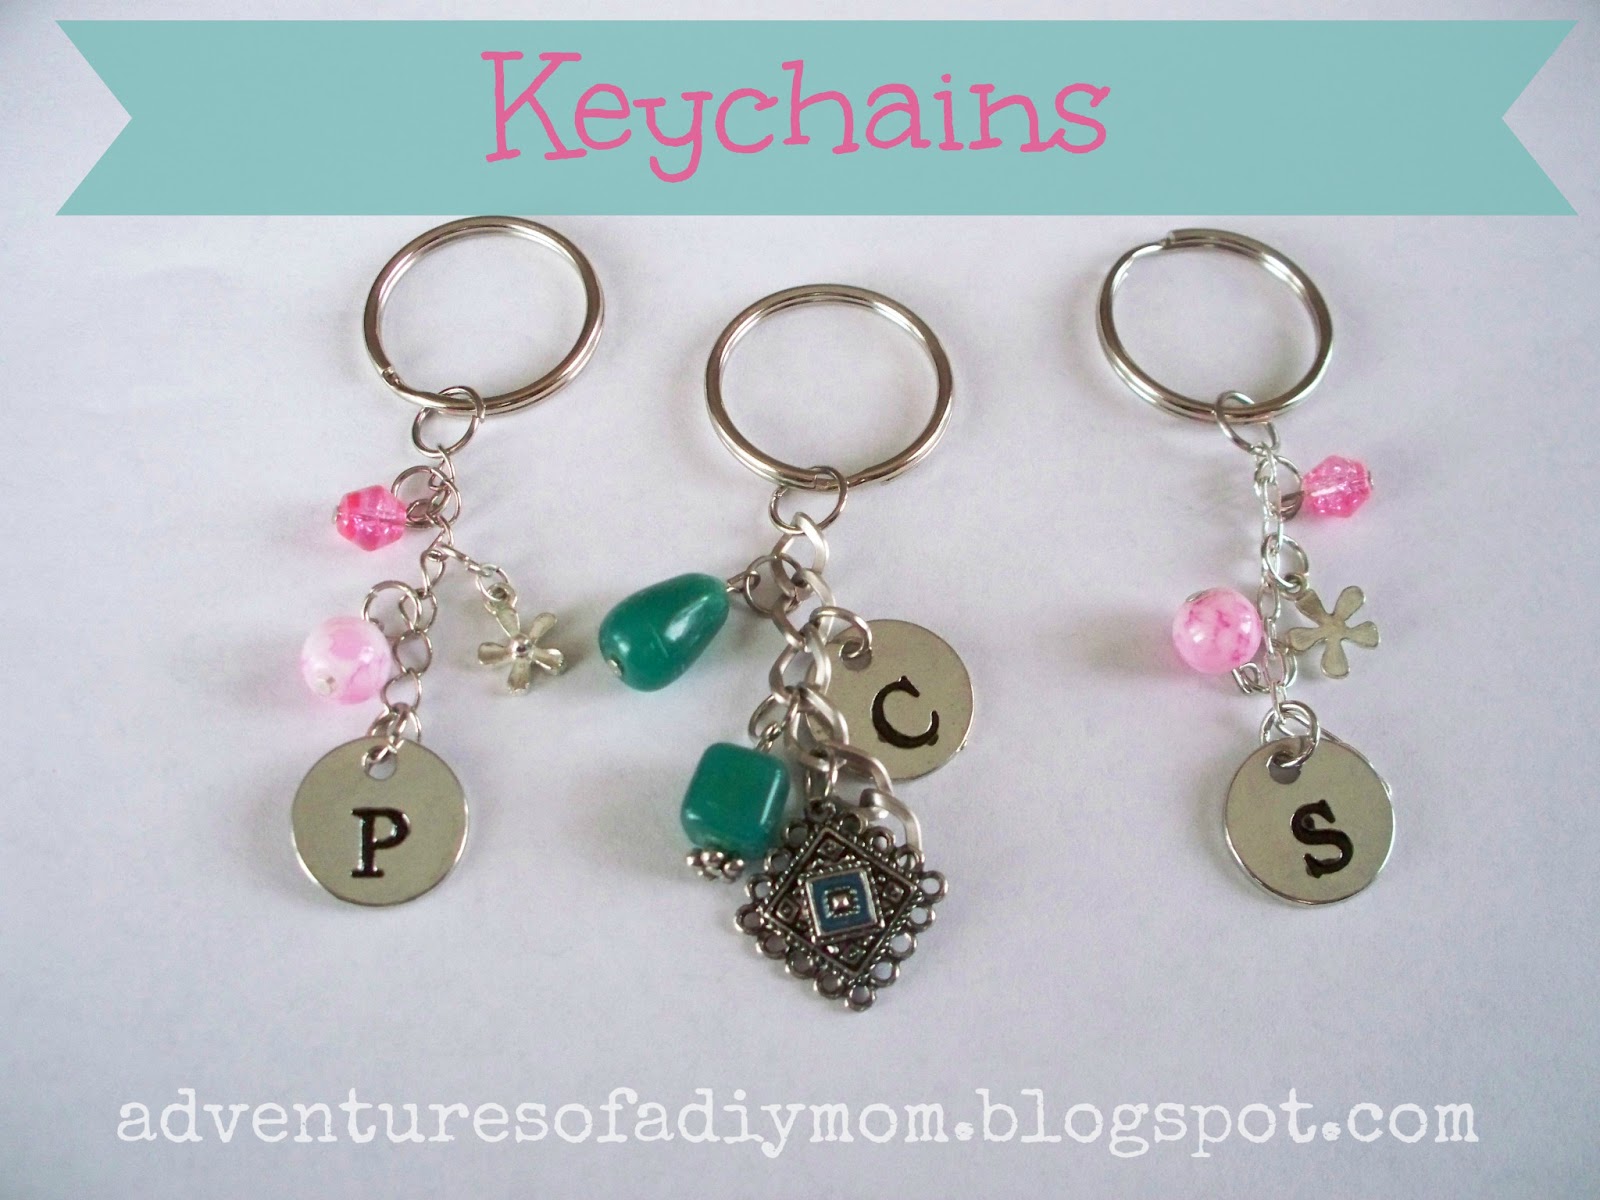 How to Make Your Own Keychains - Adventures of a DIY Mom